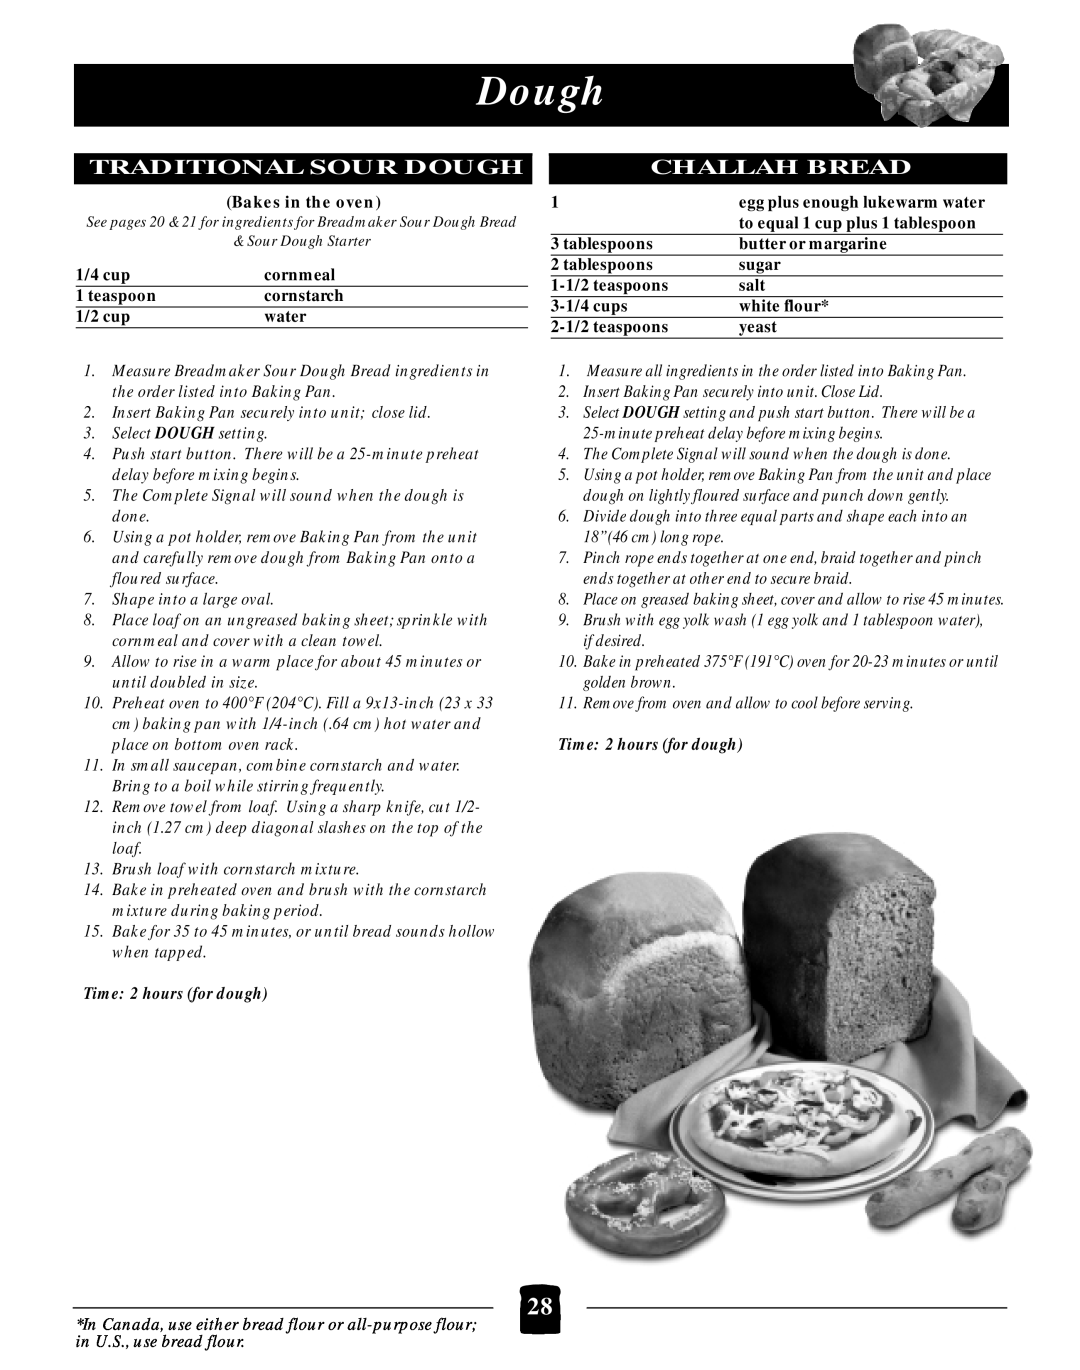 Black & Decker B2005 manual Traditional Sour Dough, Challah Bread, Time 2 hours for dough 